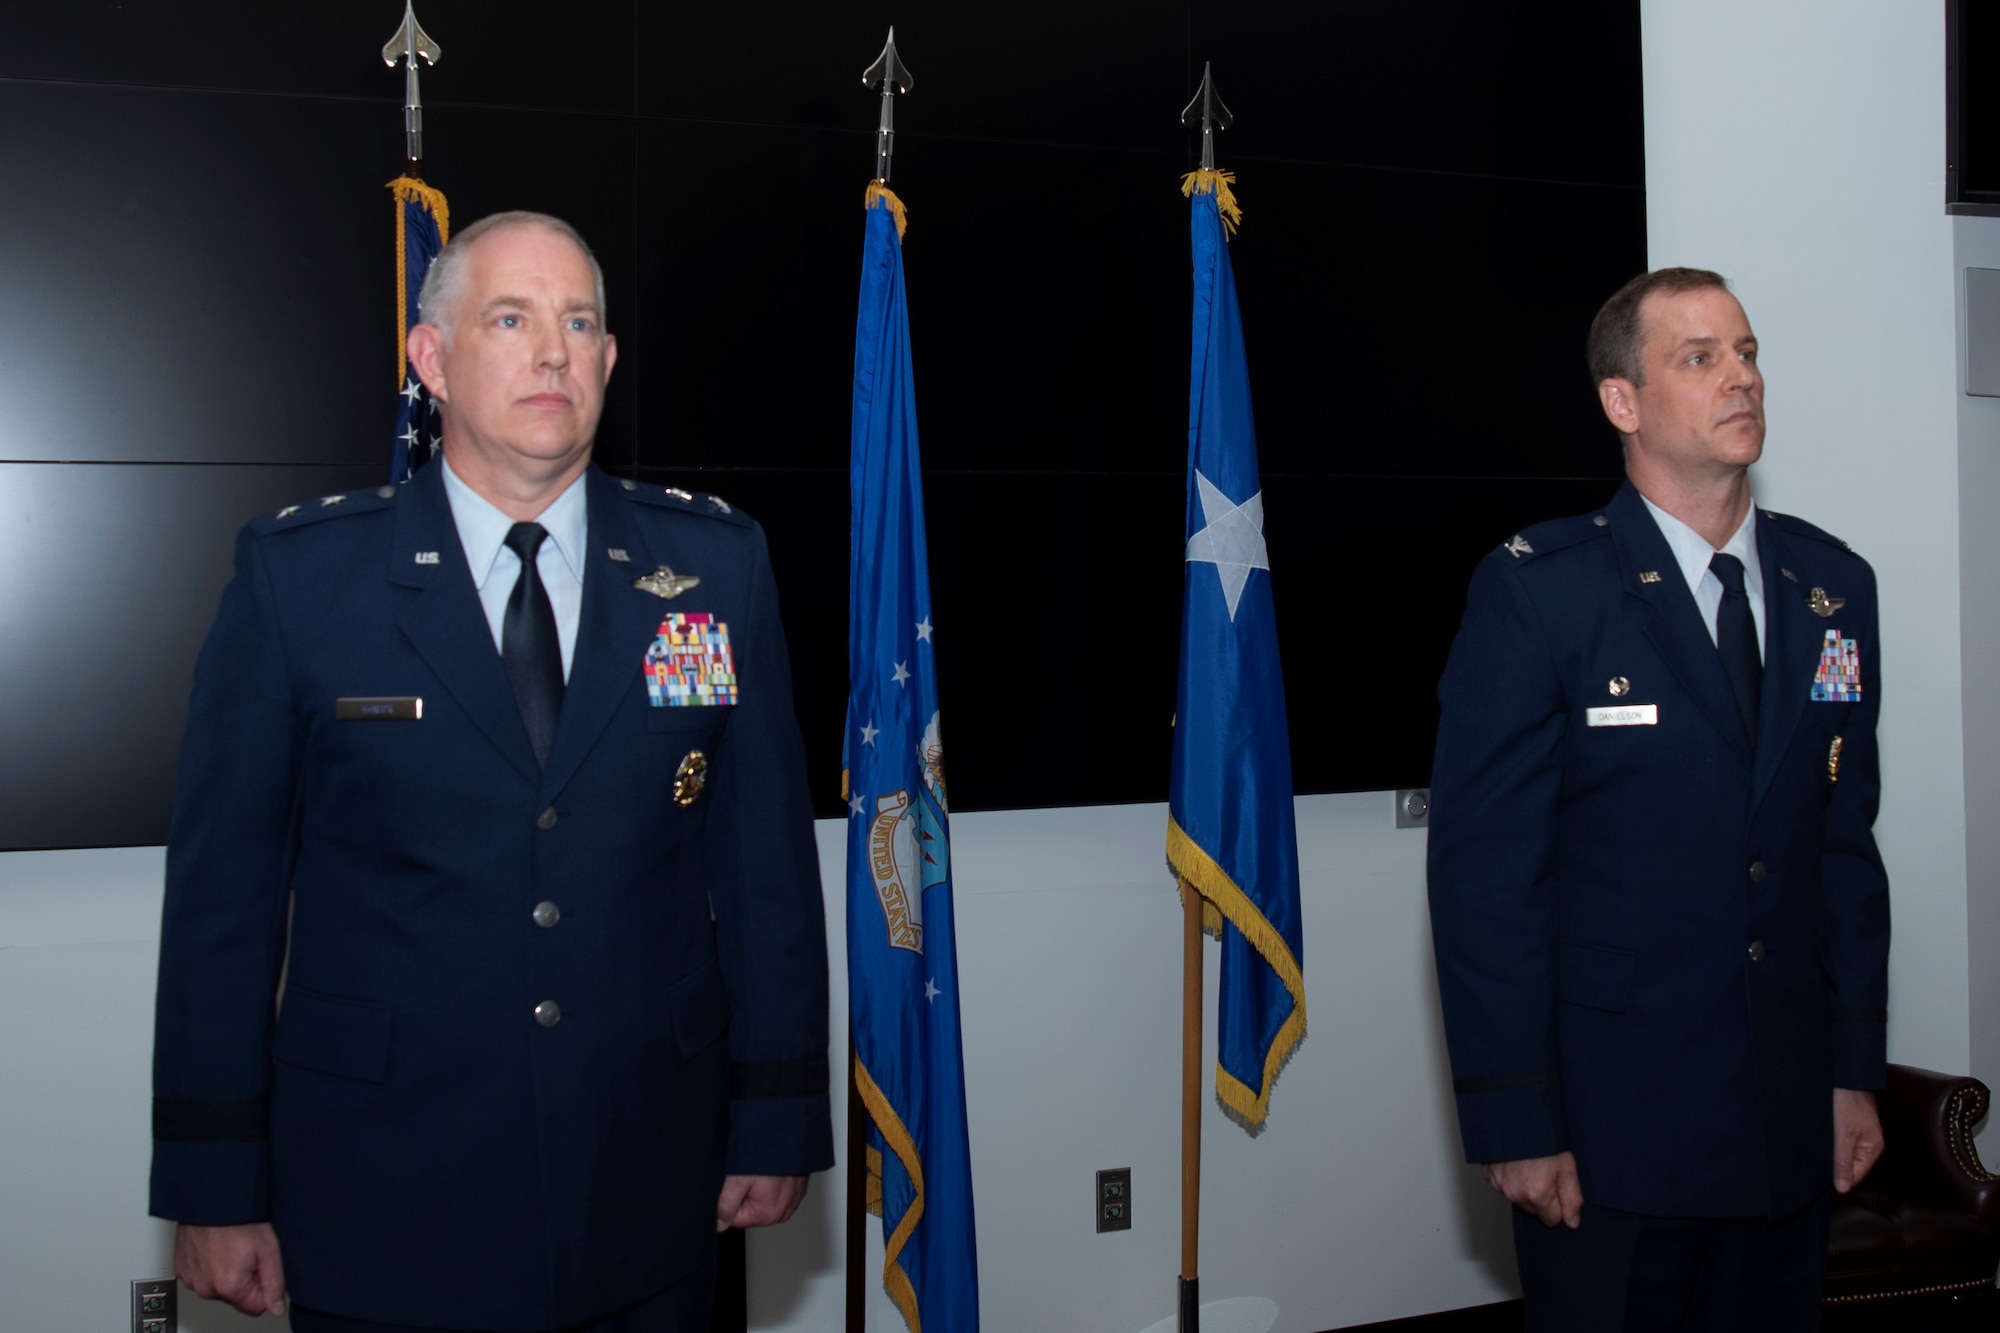 Maj. Gen. John R. Gordy, commander of the U.S. Air Force Expeditionary Center at Joint Base McGuire-Dix-Lakehurst, N.J., presided over the change of command ceremony. Maj. Gen. Gordy (left) recognizes Col. Timothy S. Danielson (right) before he relinquished command of the 43 AMOG to Col. Joseph "Jacko" M. Vanoni.